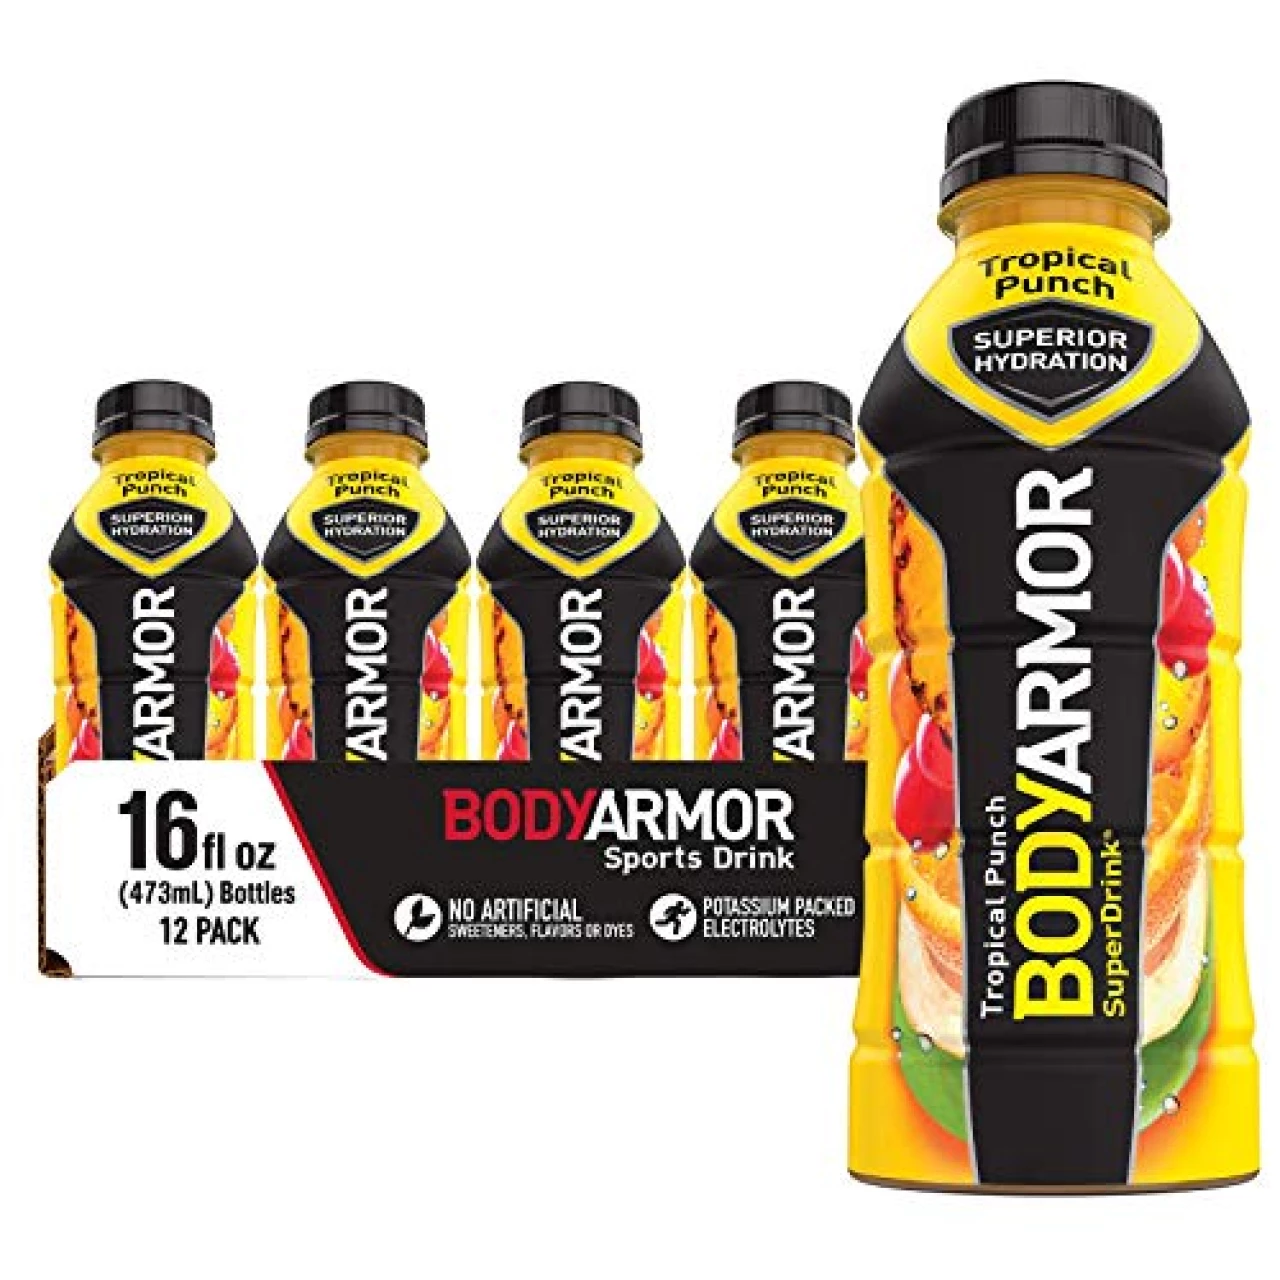 BODYARMOR Sports Drink Sports Beverage, Tropical Punch, Coconut Water Hydration, Natural Flavors With Vitamins, Potassium-Packed Electrolytes, Perfect For Athletes, 16 Fl Oz (Pack of 12)